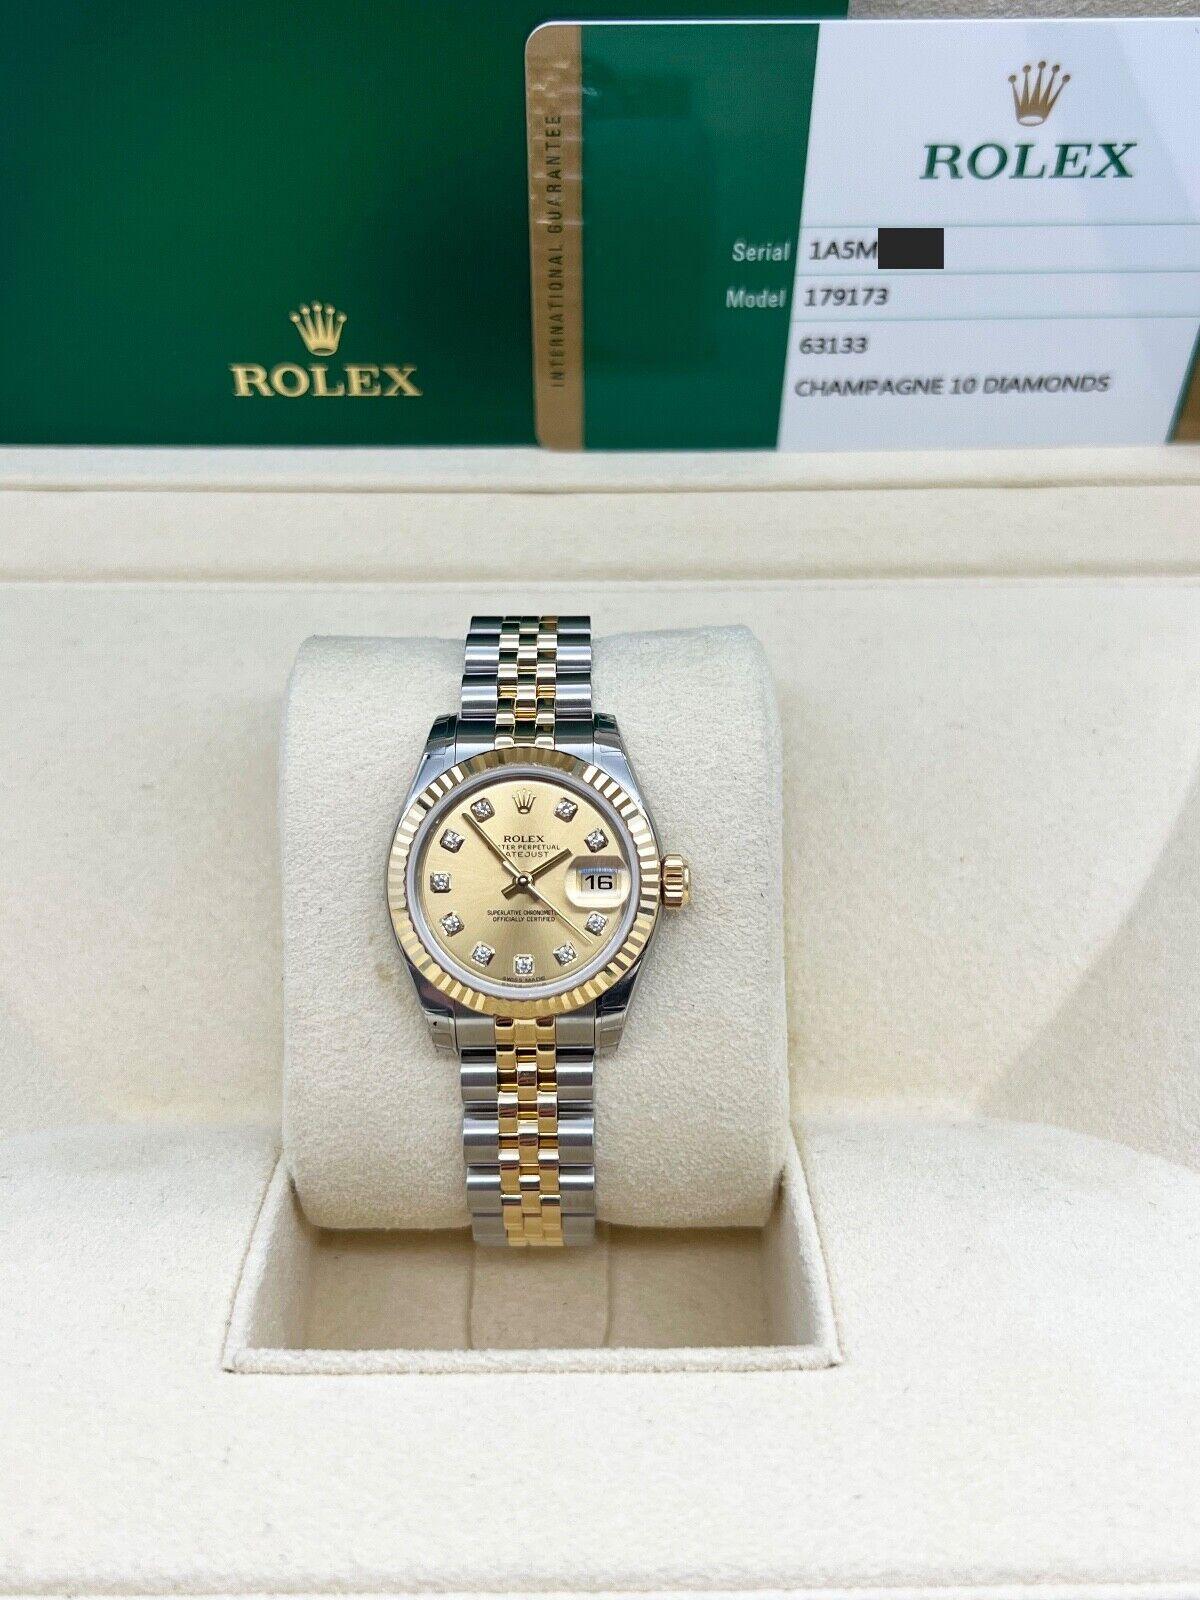 
Style Number: 179173



Serial: 1A5M2***



Year: 2015

 

Model: Ladies Datejust

 

Case Material: Stainless Steel

 

Band: 18K Yellow Gold & Stainless Steel 

  

Bezel: 18K Yellow Gold

  

Dial: Factory Champagne Diamond Dial

 

Face: